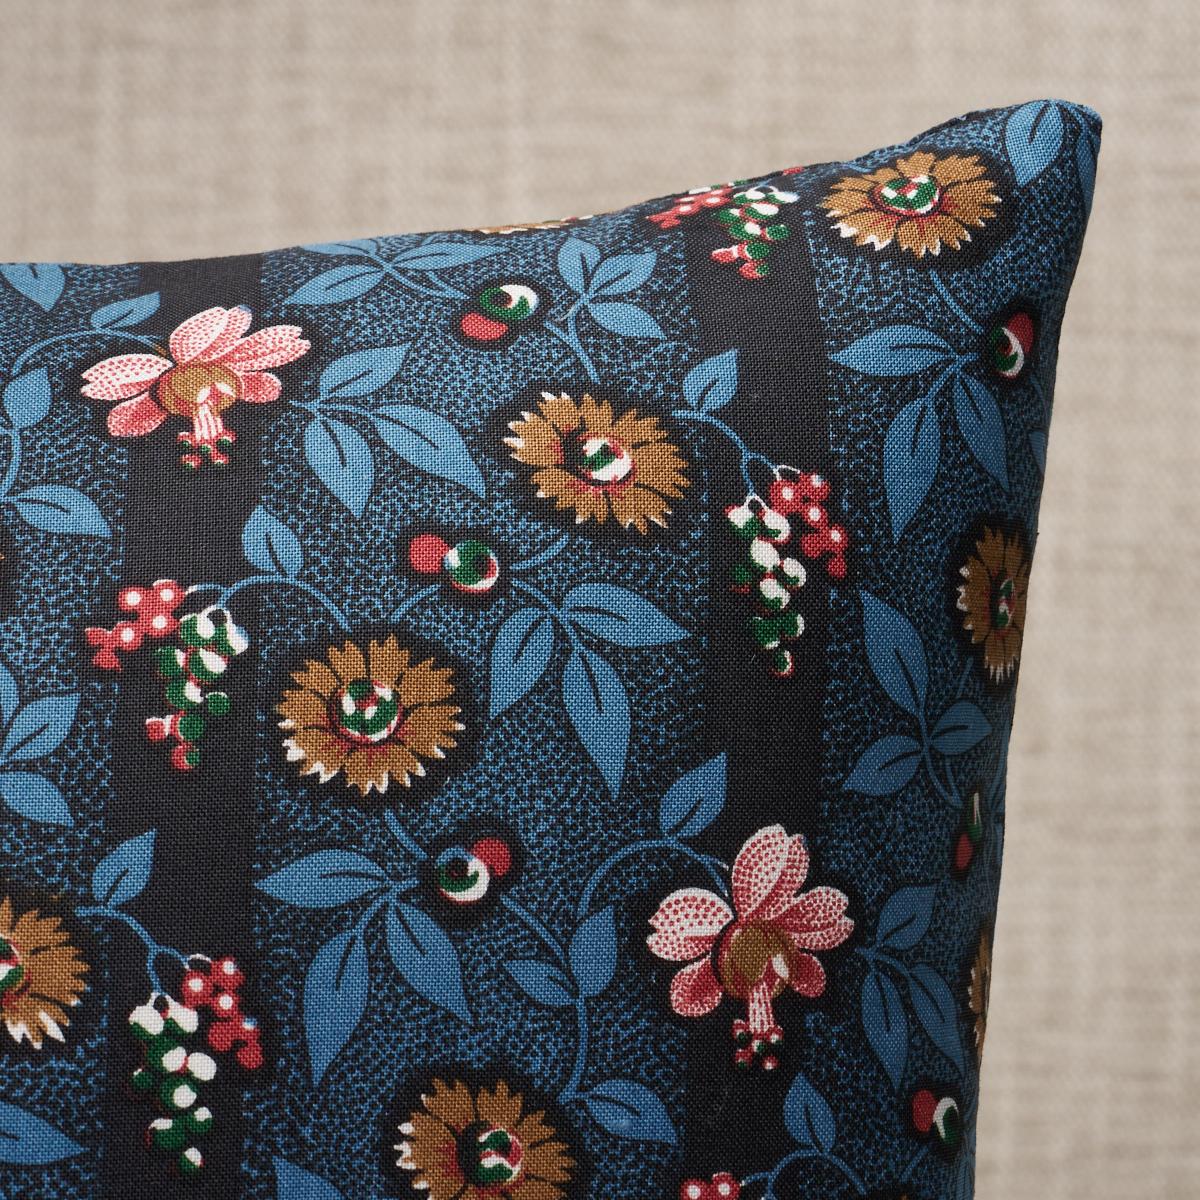 This pillow features LaRue Stripe with a knife edge finish. Inspired by an antique fabric, this layered floral stripe is printed on a crisp cotton ground. Pillow includes a feather/down fill insert and hidden zipper closure.